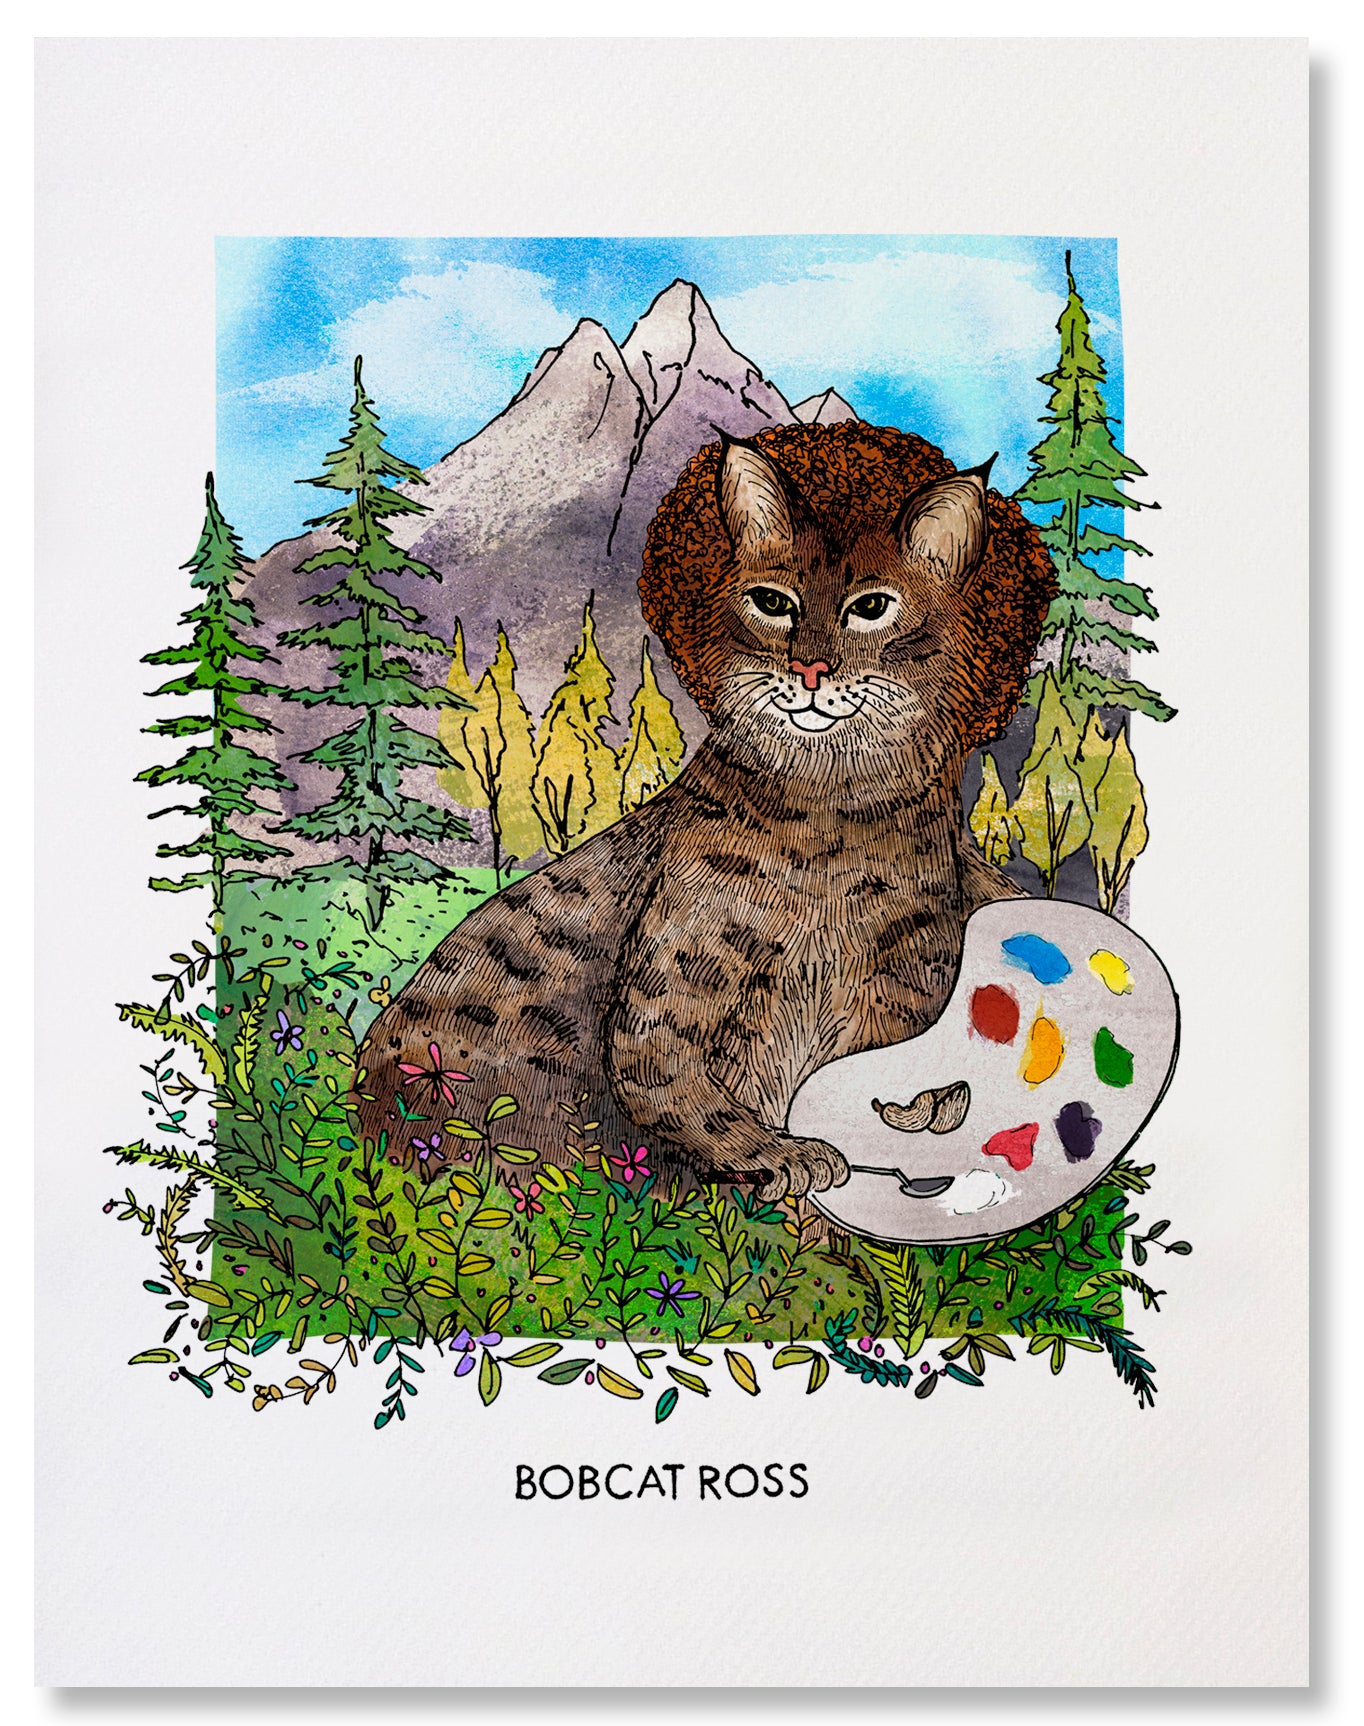 Bobcat Ross - Illustrated Funny Pun Everyday Card